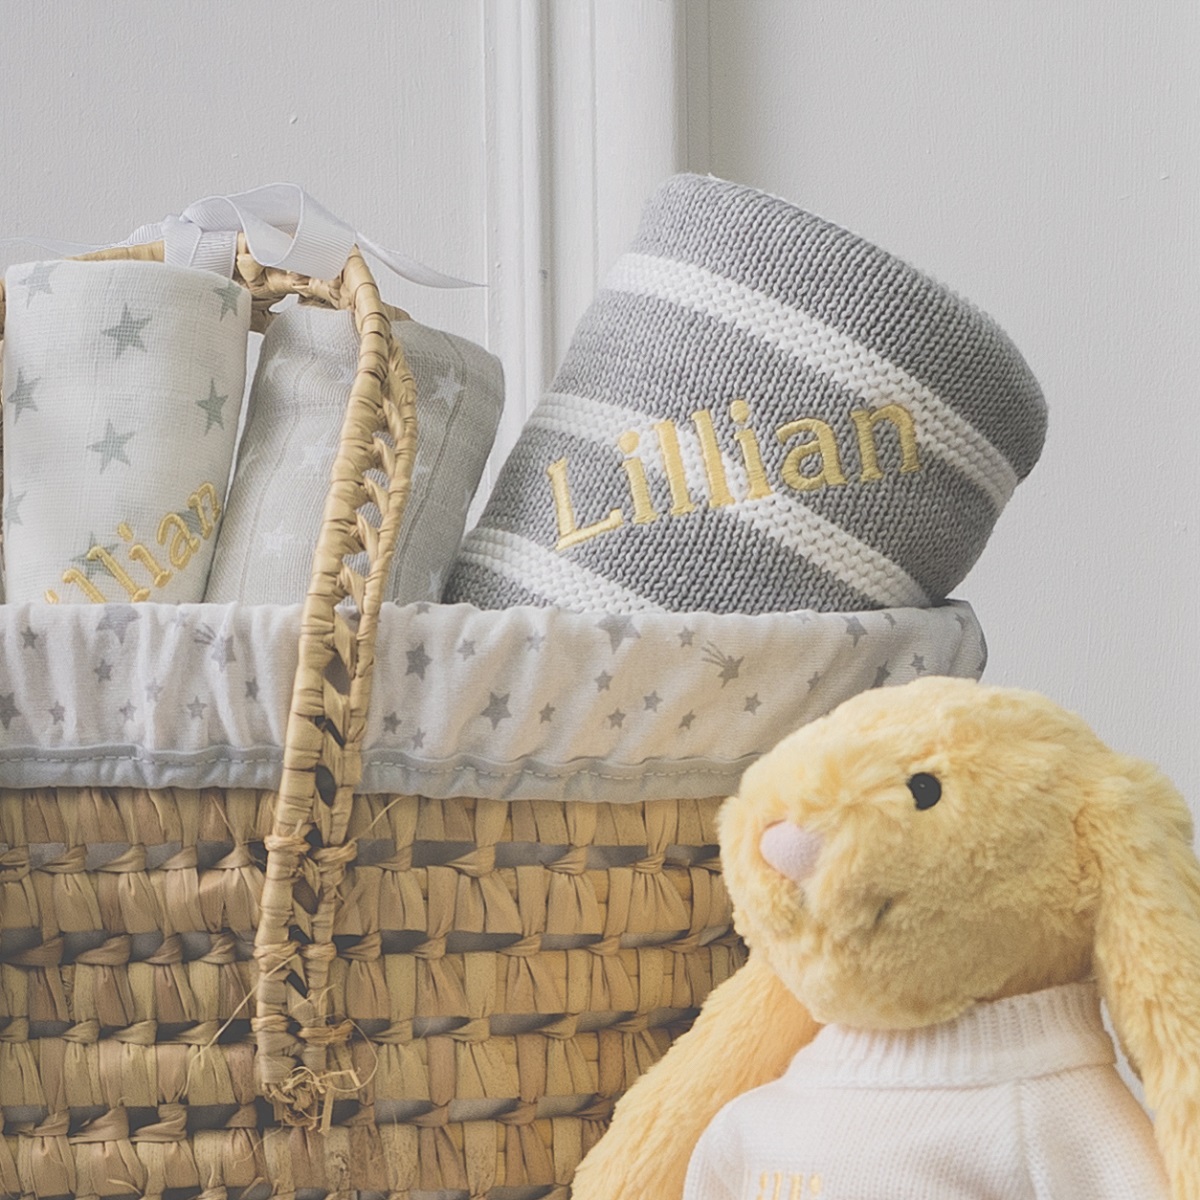 Personalised white and grey baby gift basket with lemon bunny soft toy